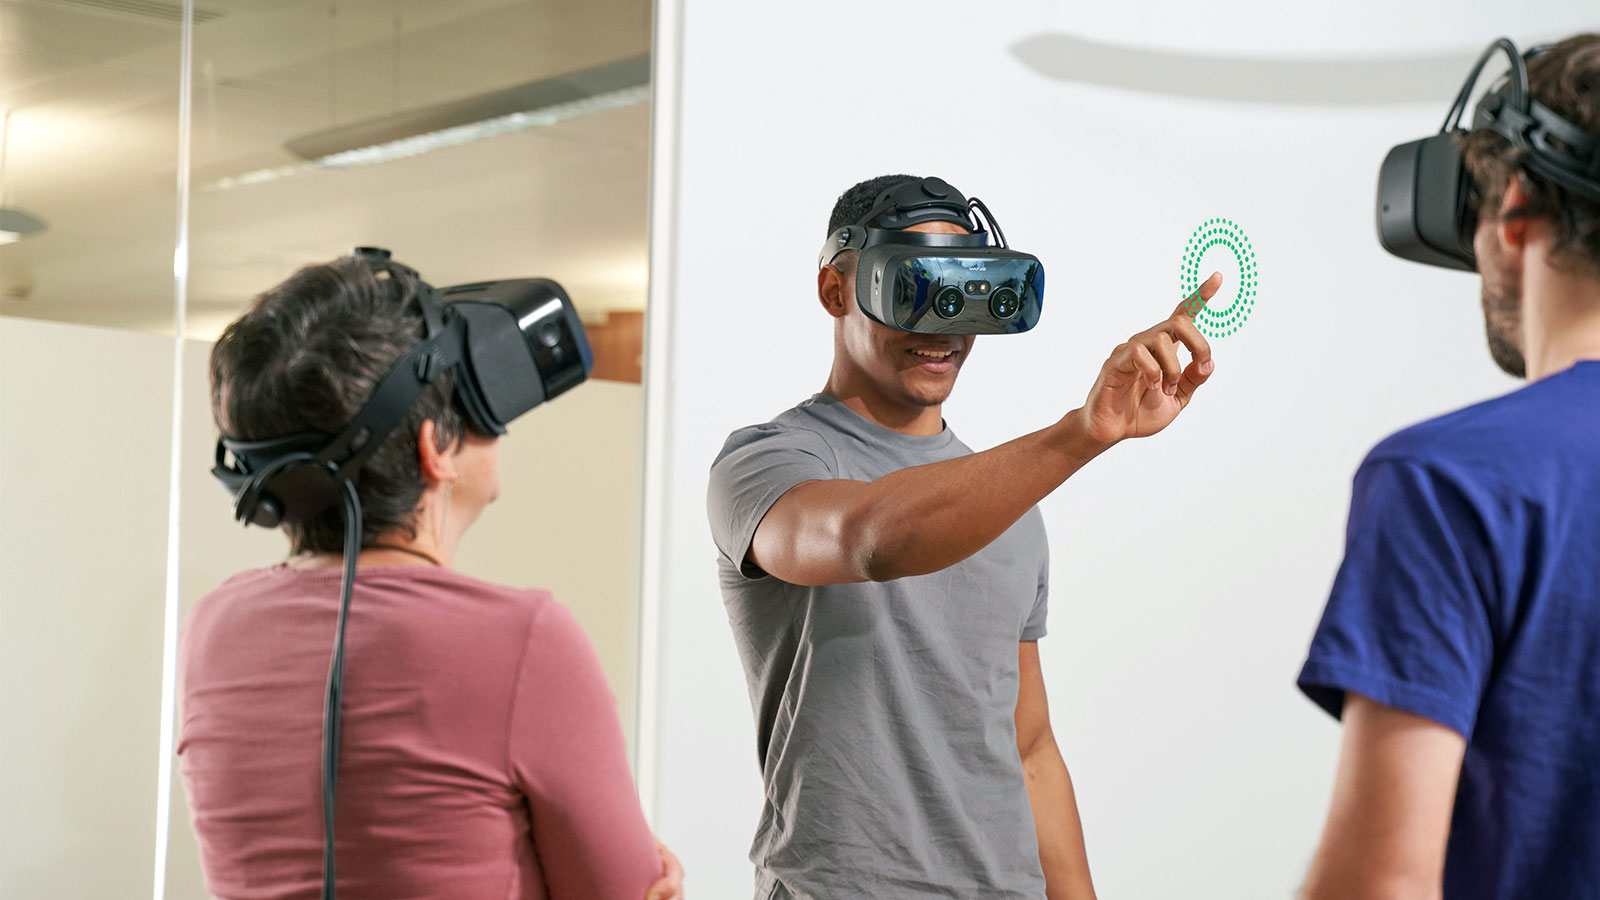 Group of adults wearing VR headsets in an enterprise setting